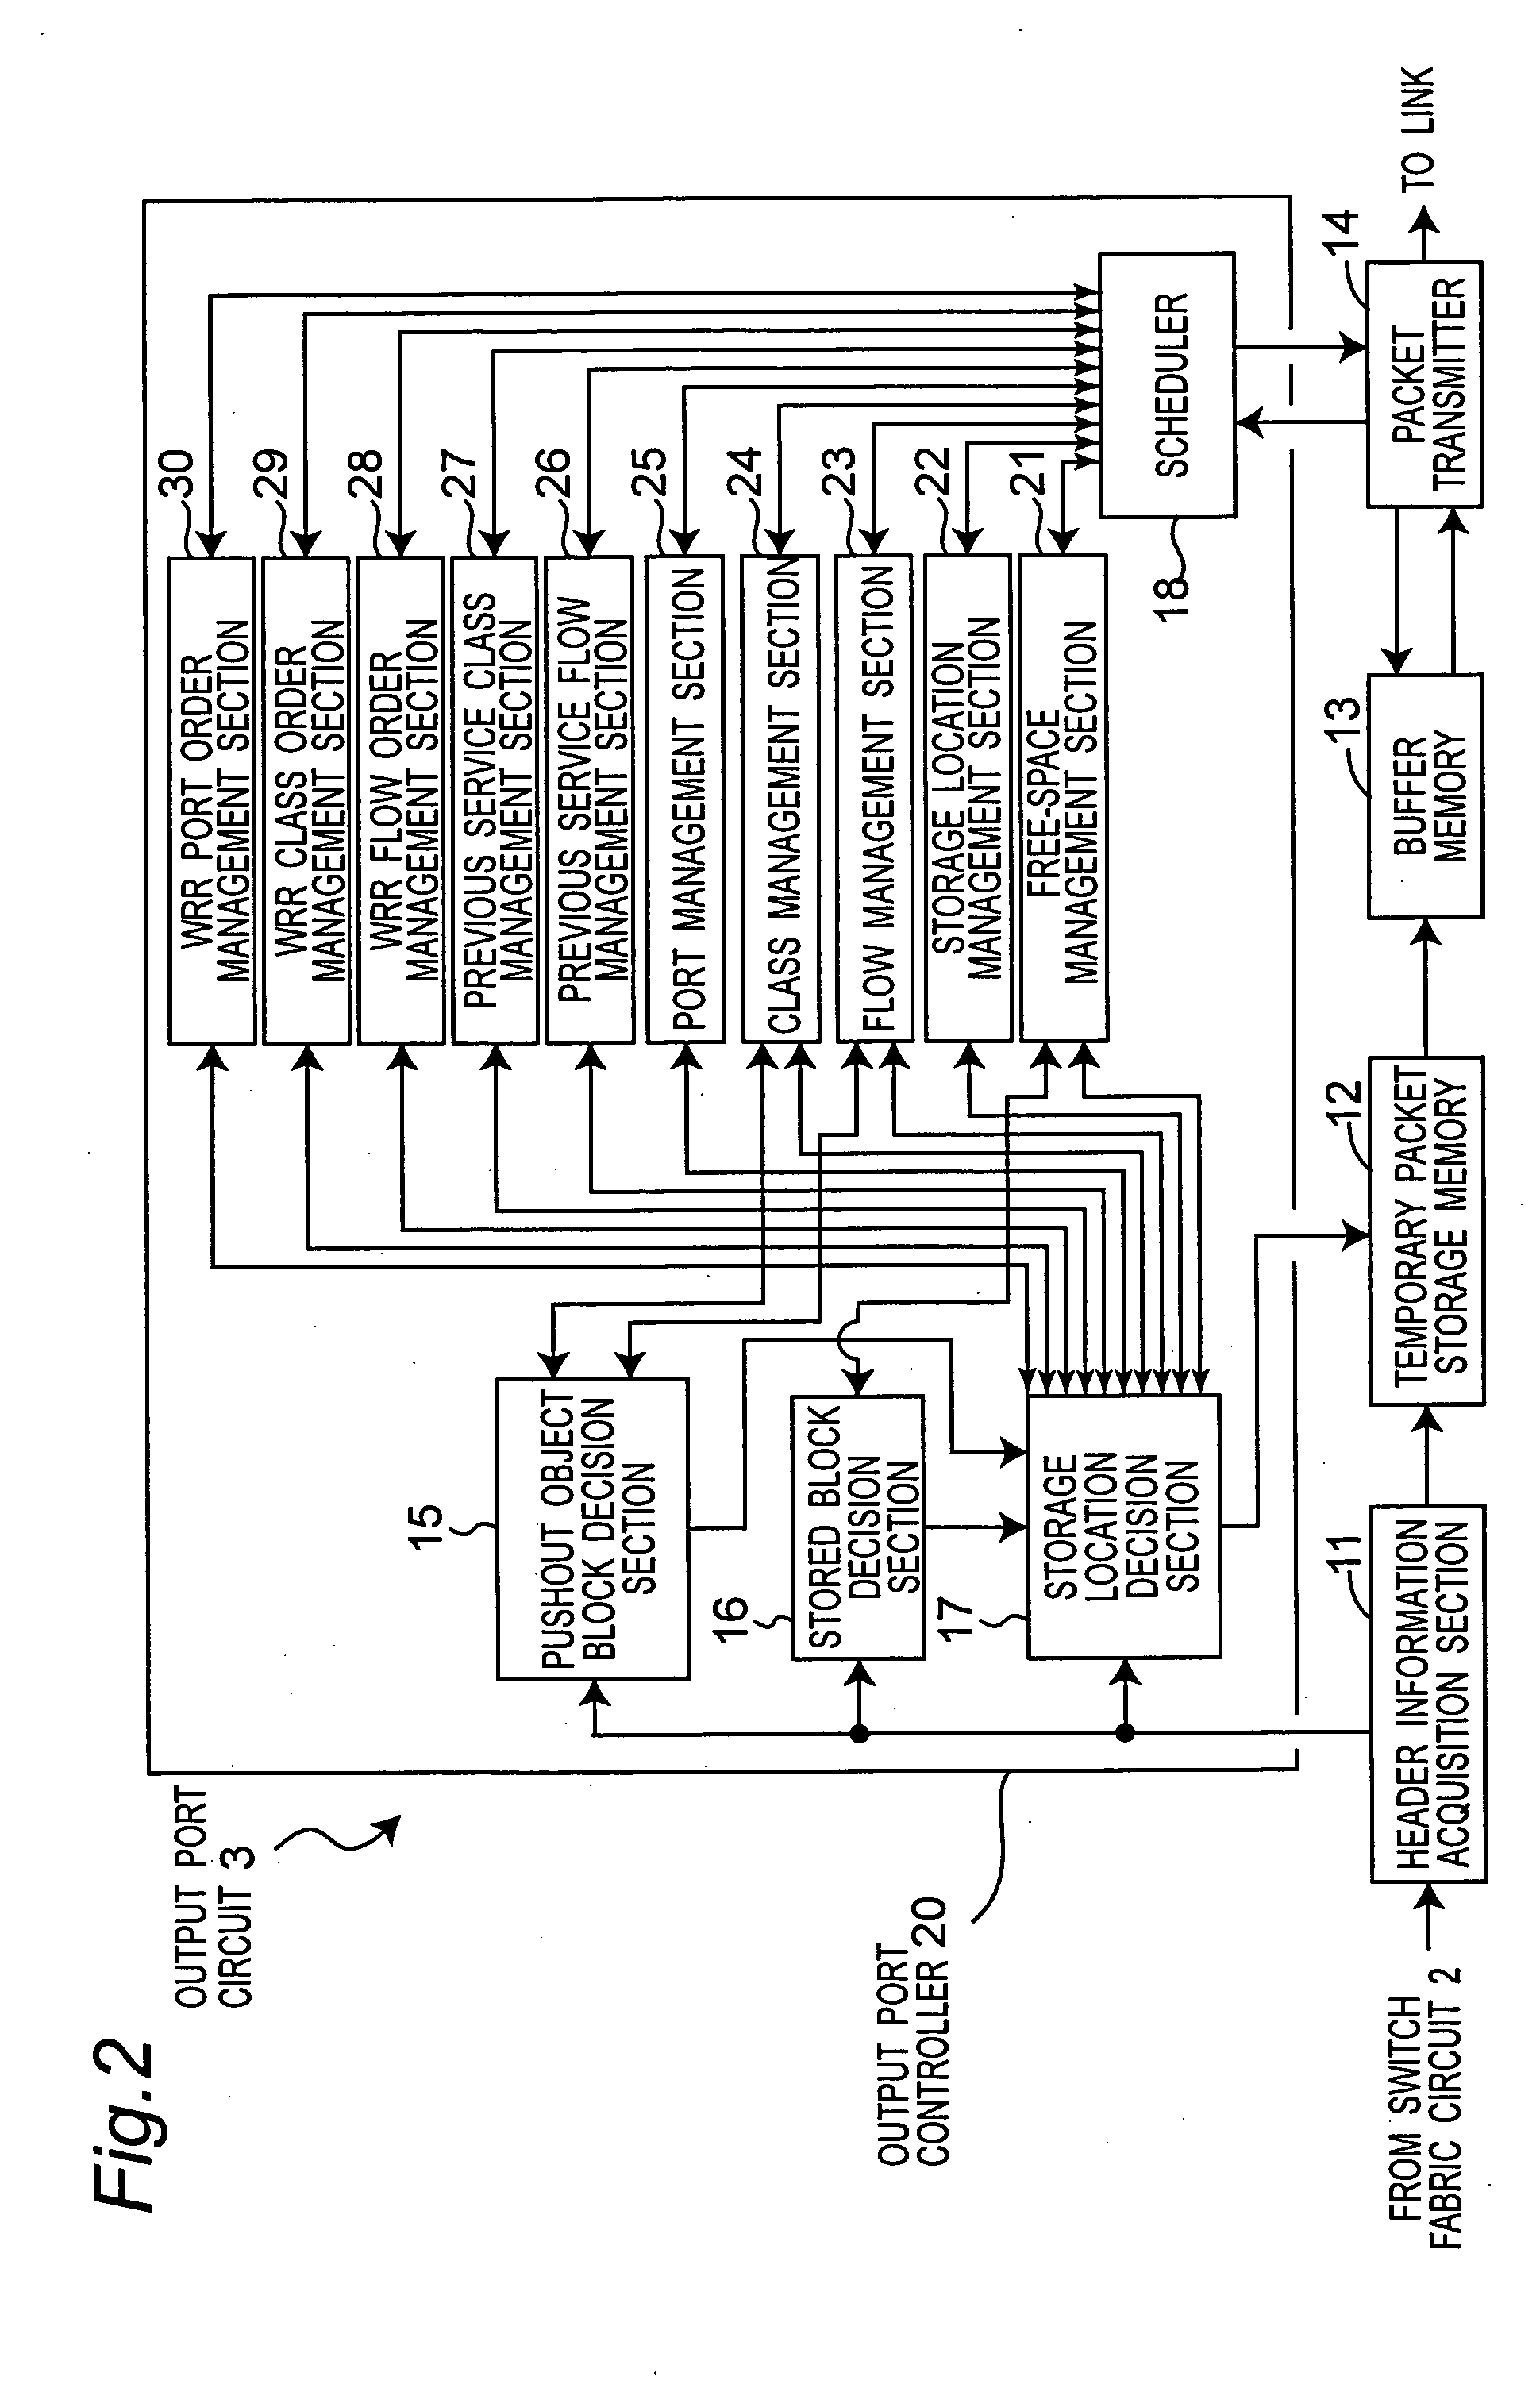 Router apparatus provided with output port circuit including storage unit, and method of controlling output port circuit of router apparatus